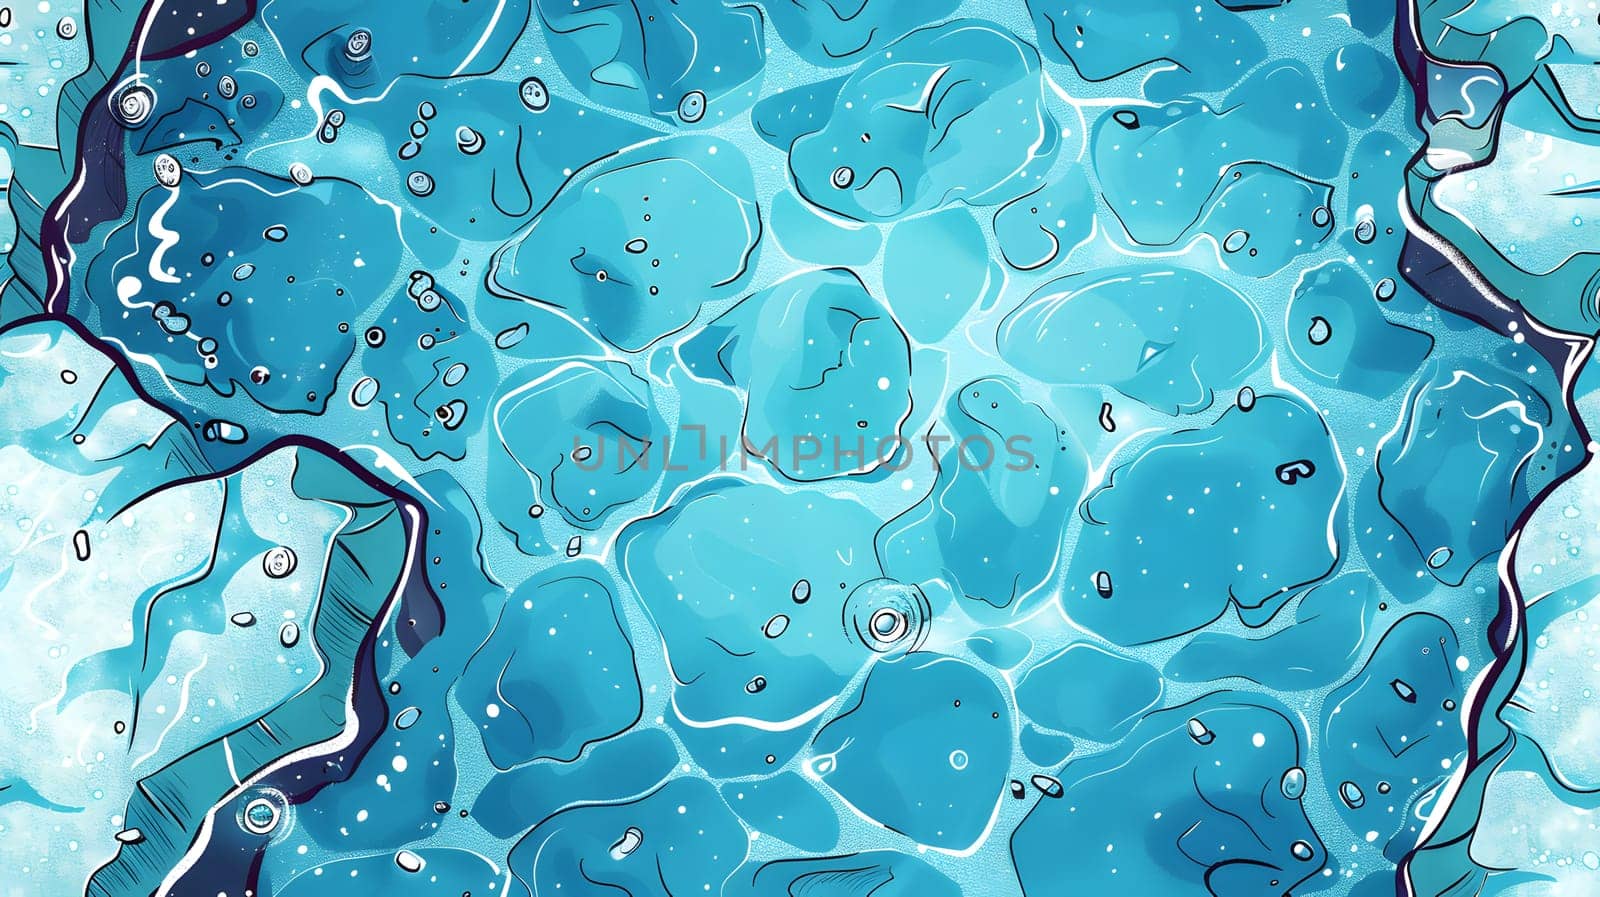 a close up of a blue water surface with bubbles by Nadtochiy